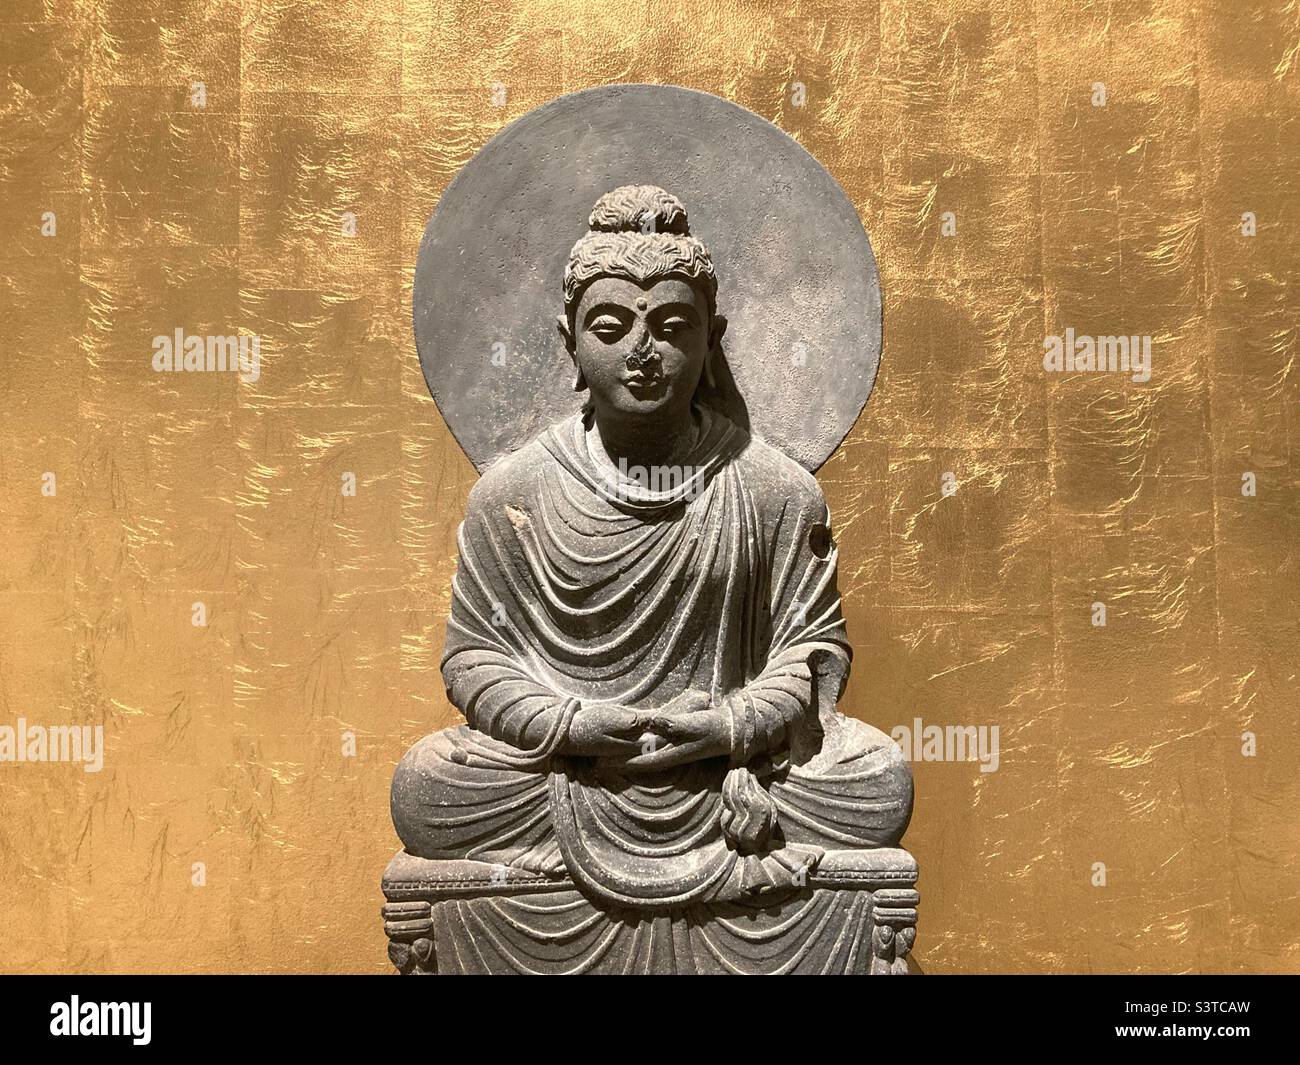 A Buddha Statue in the ethnological Museum in the Humboldt Forum in Berlin, Germany Stock Photo